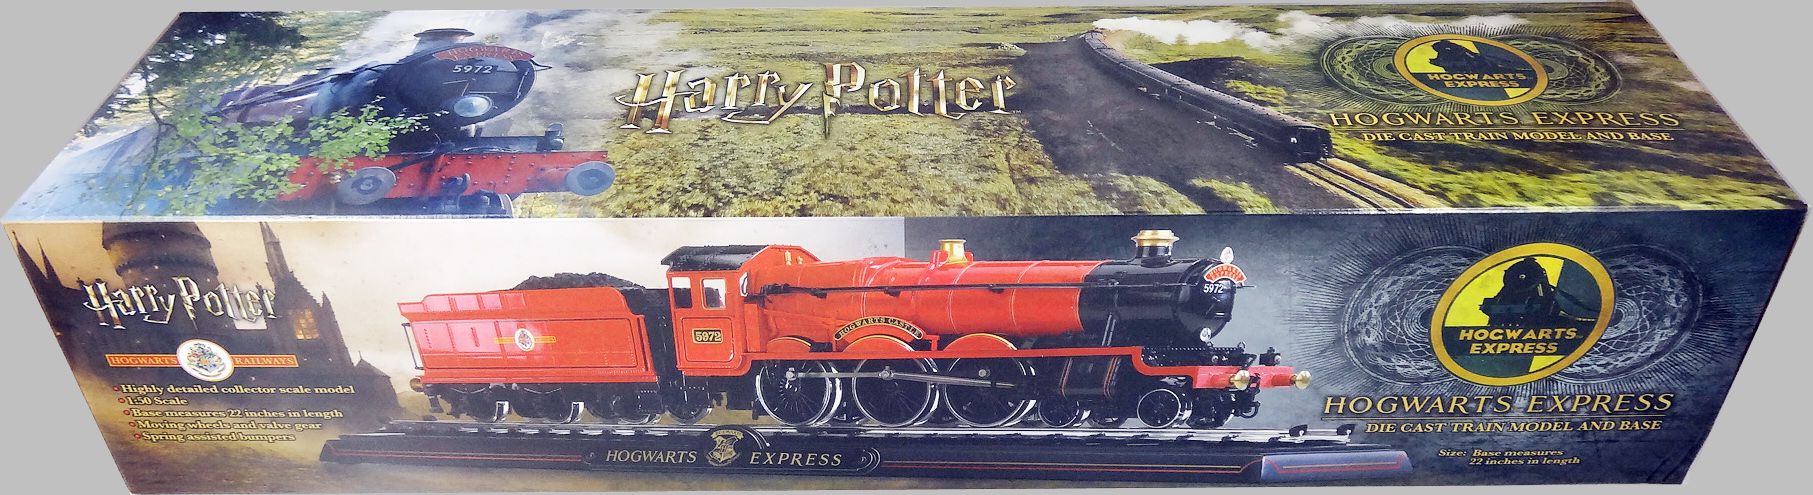 Hogwarts Express Die cast Train Model and